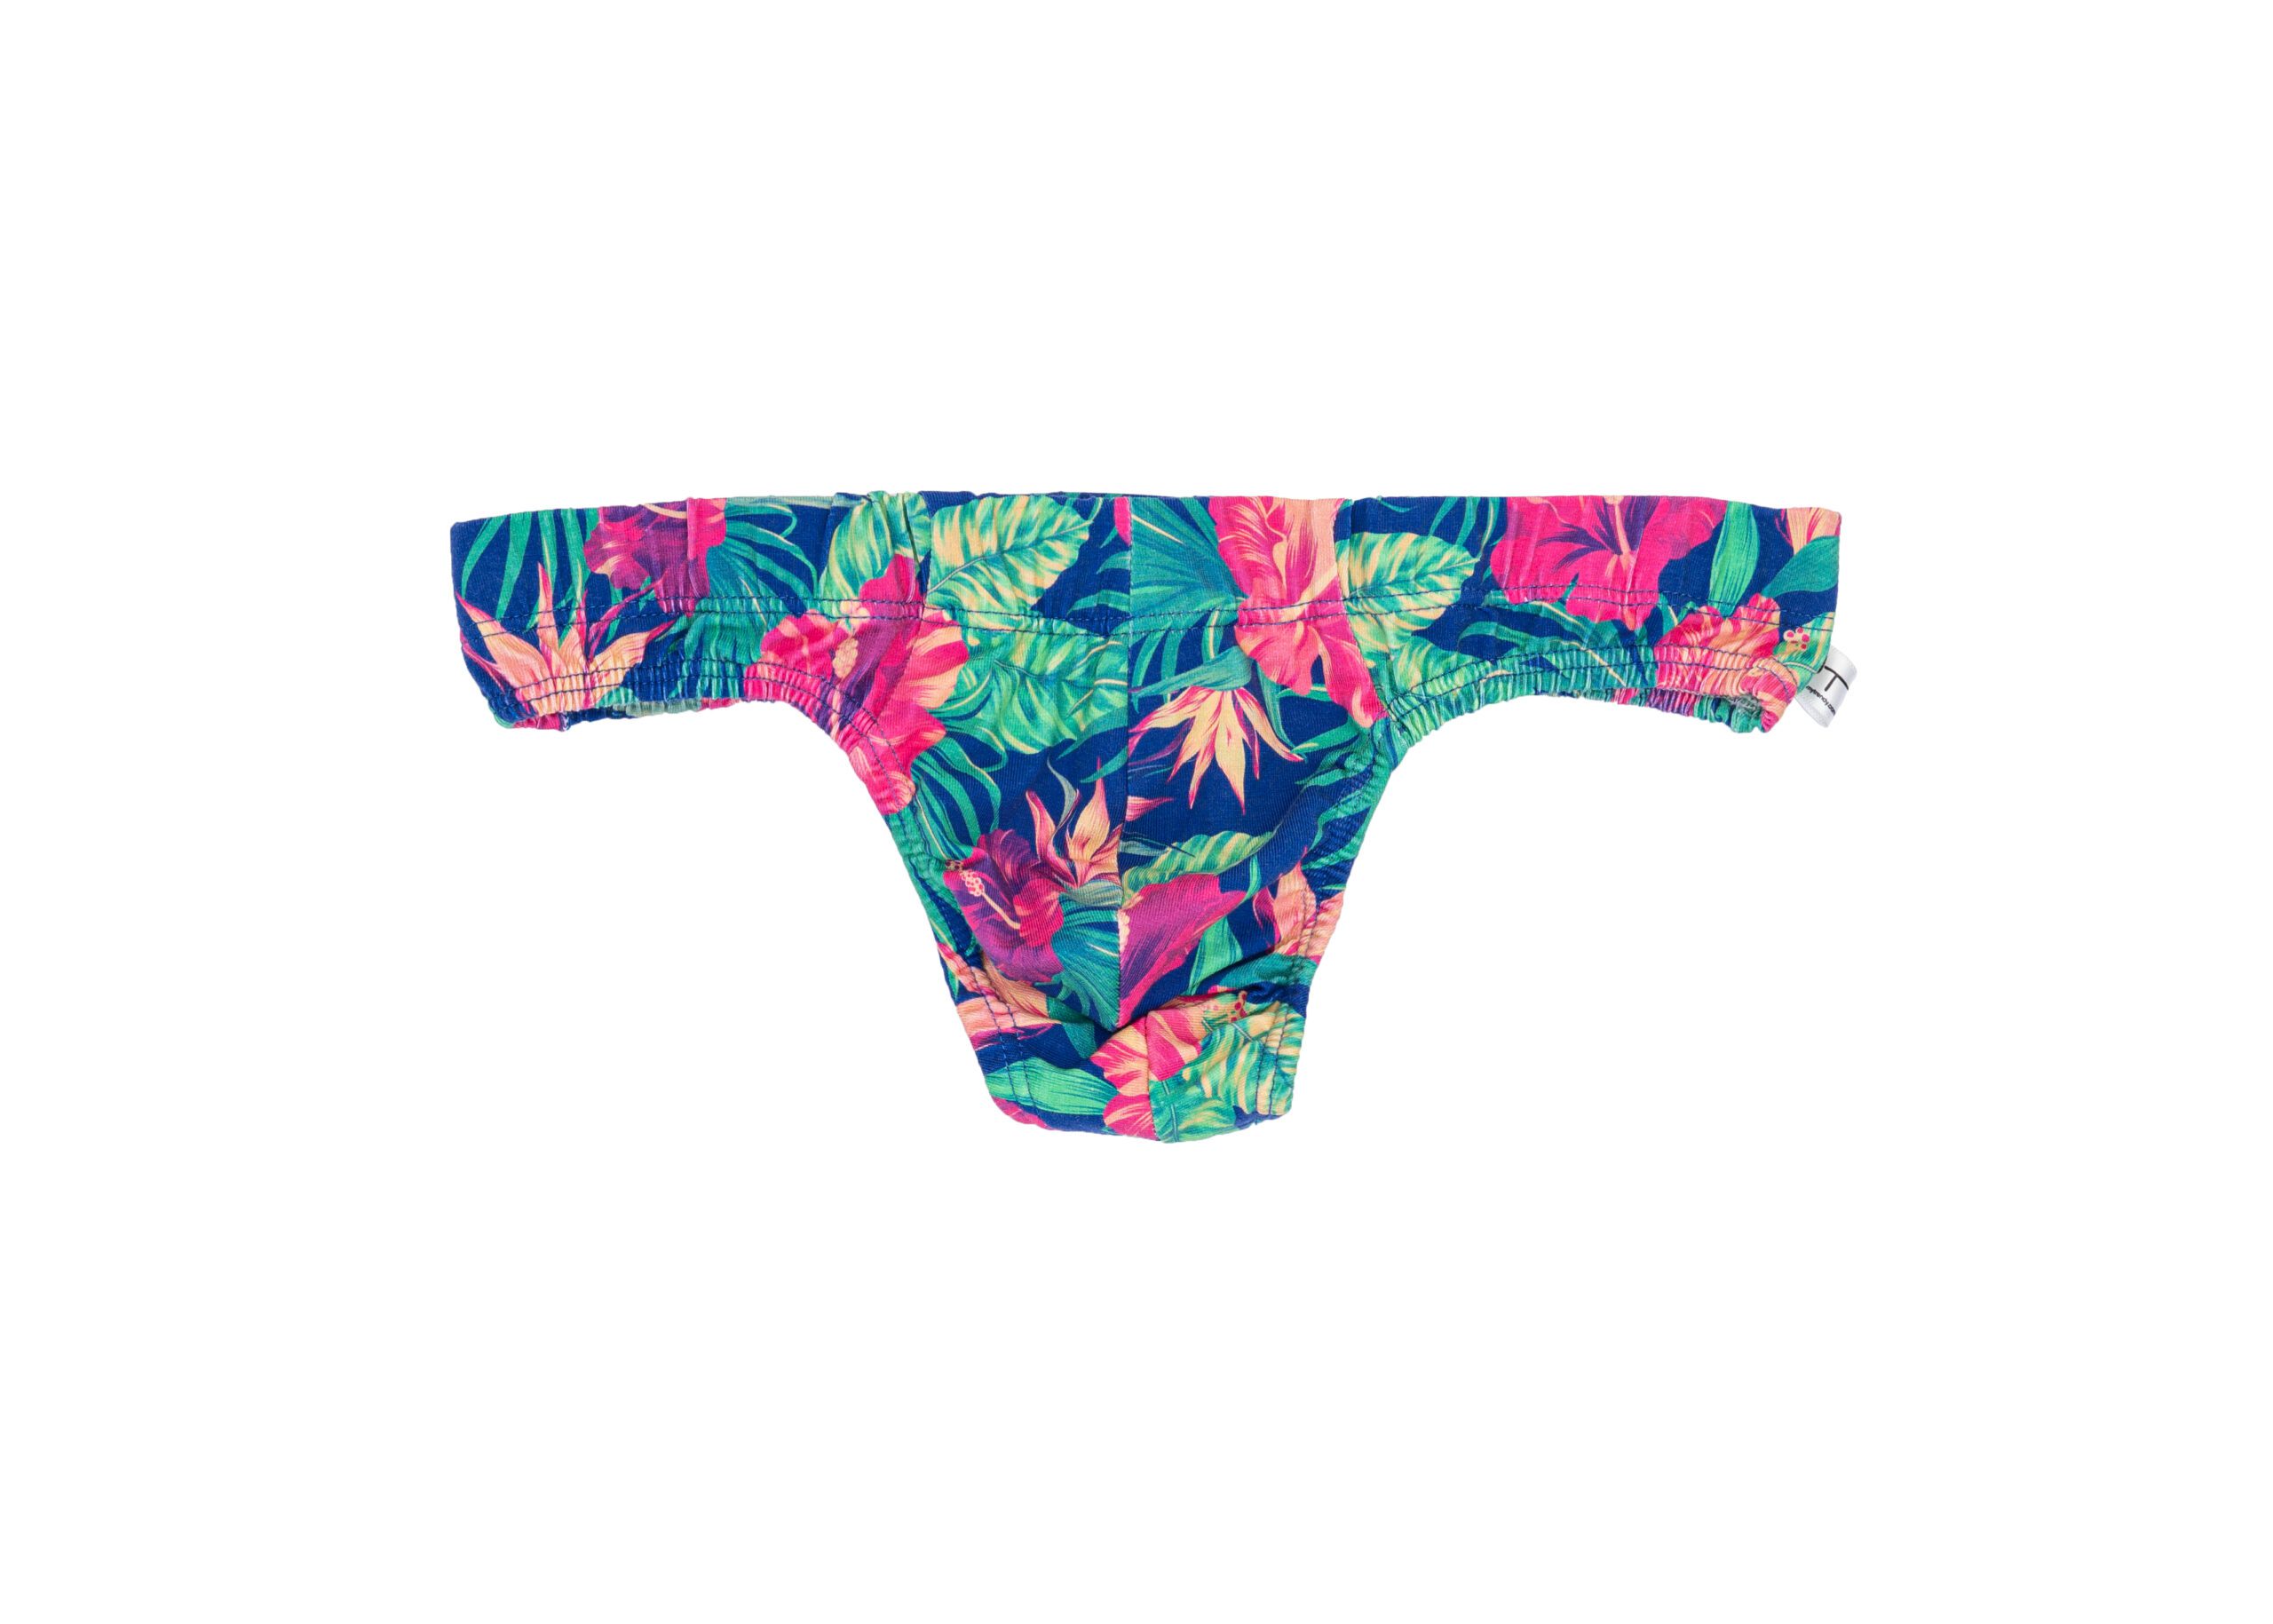 https://www.jimmytrendy.com/wp-content/uploads/2022/03/hawaii-thong-scaled.jpg